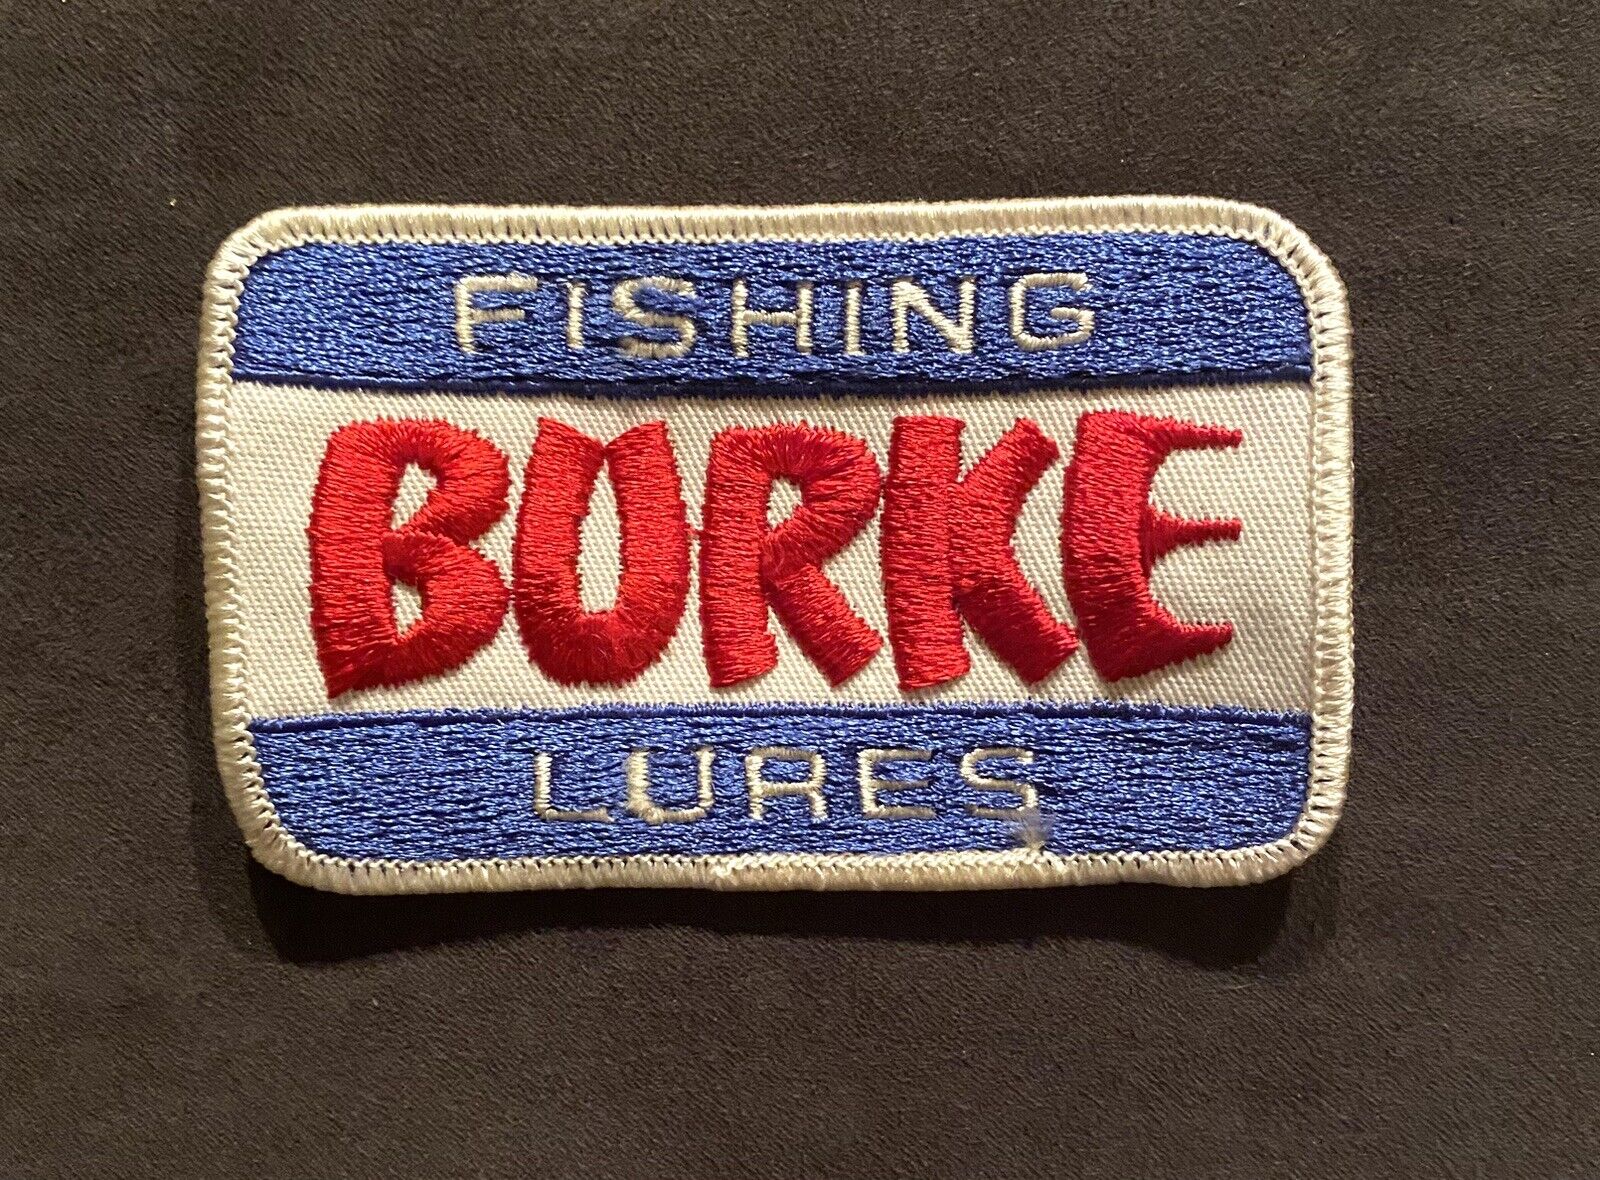 Vintage Burke Fishing Lures Patch Red White And Blue Colors Outdoors